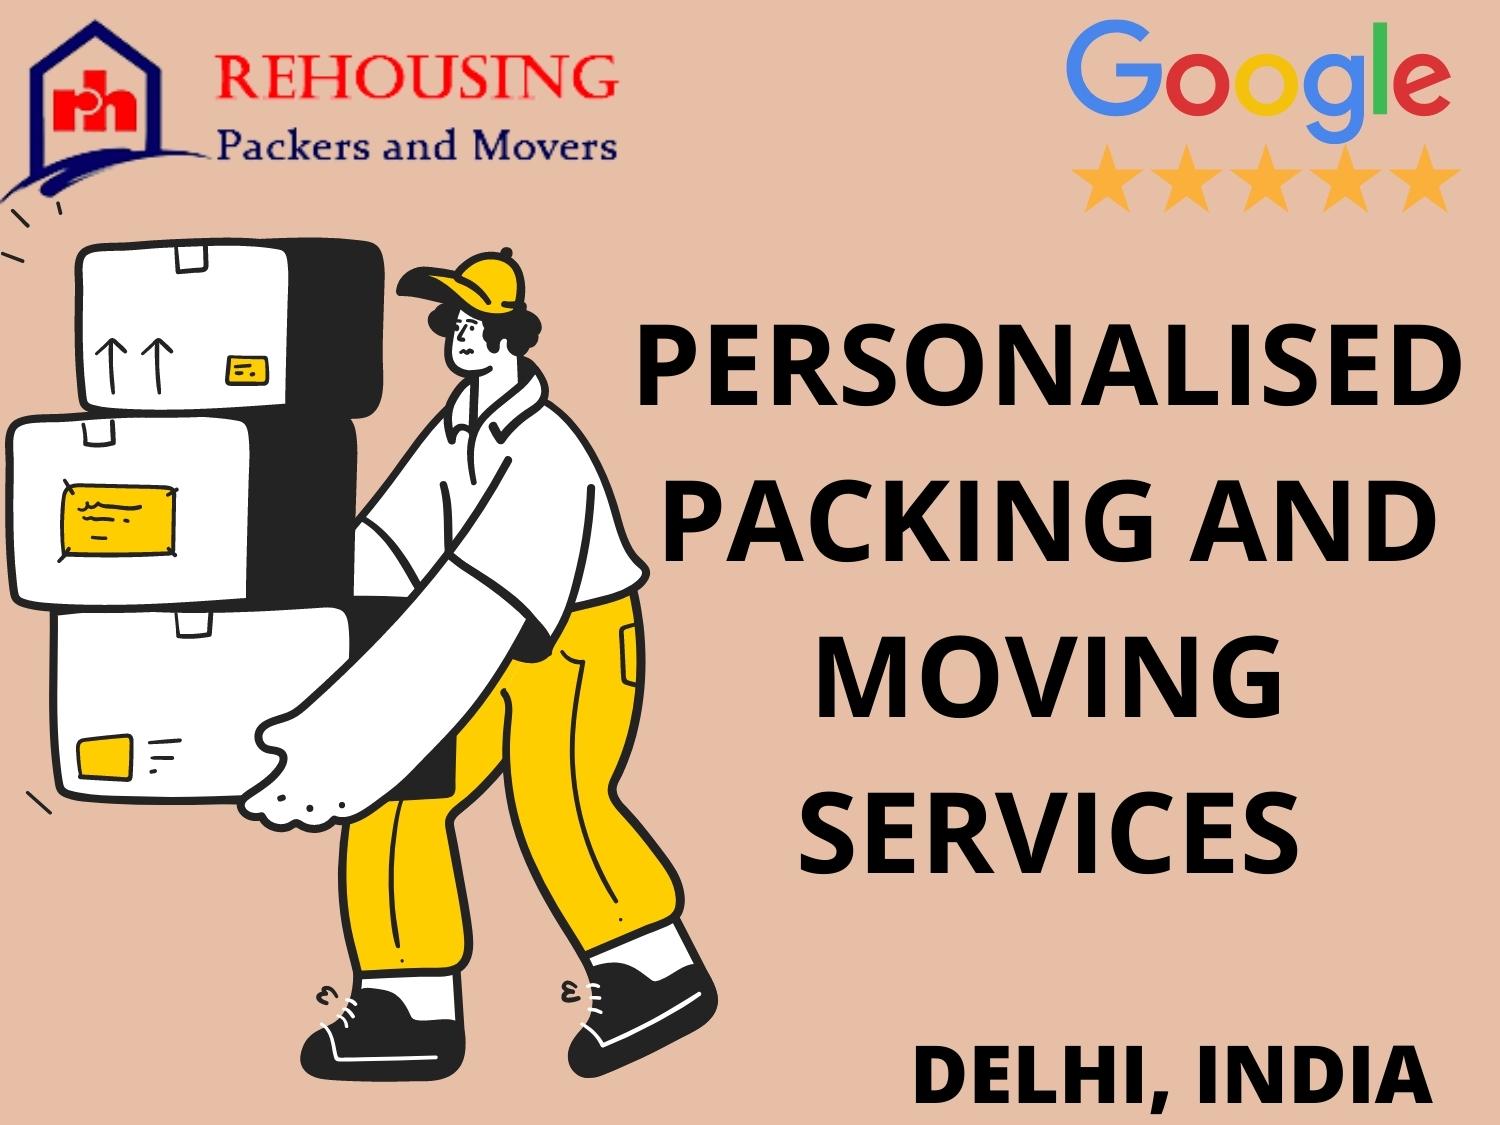 about the working of packers and movers in Delhi